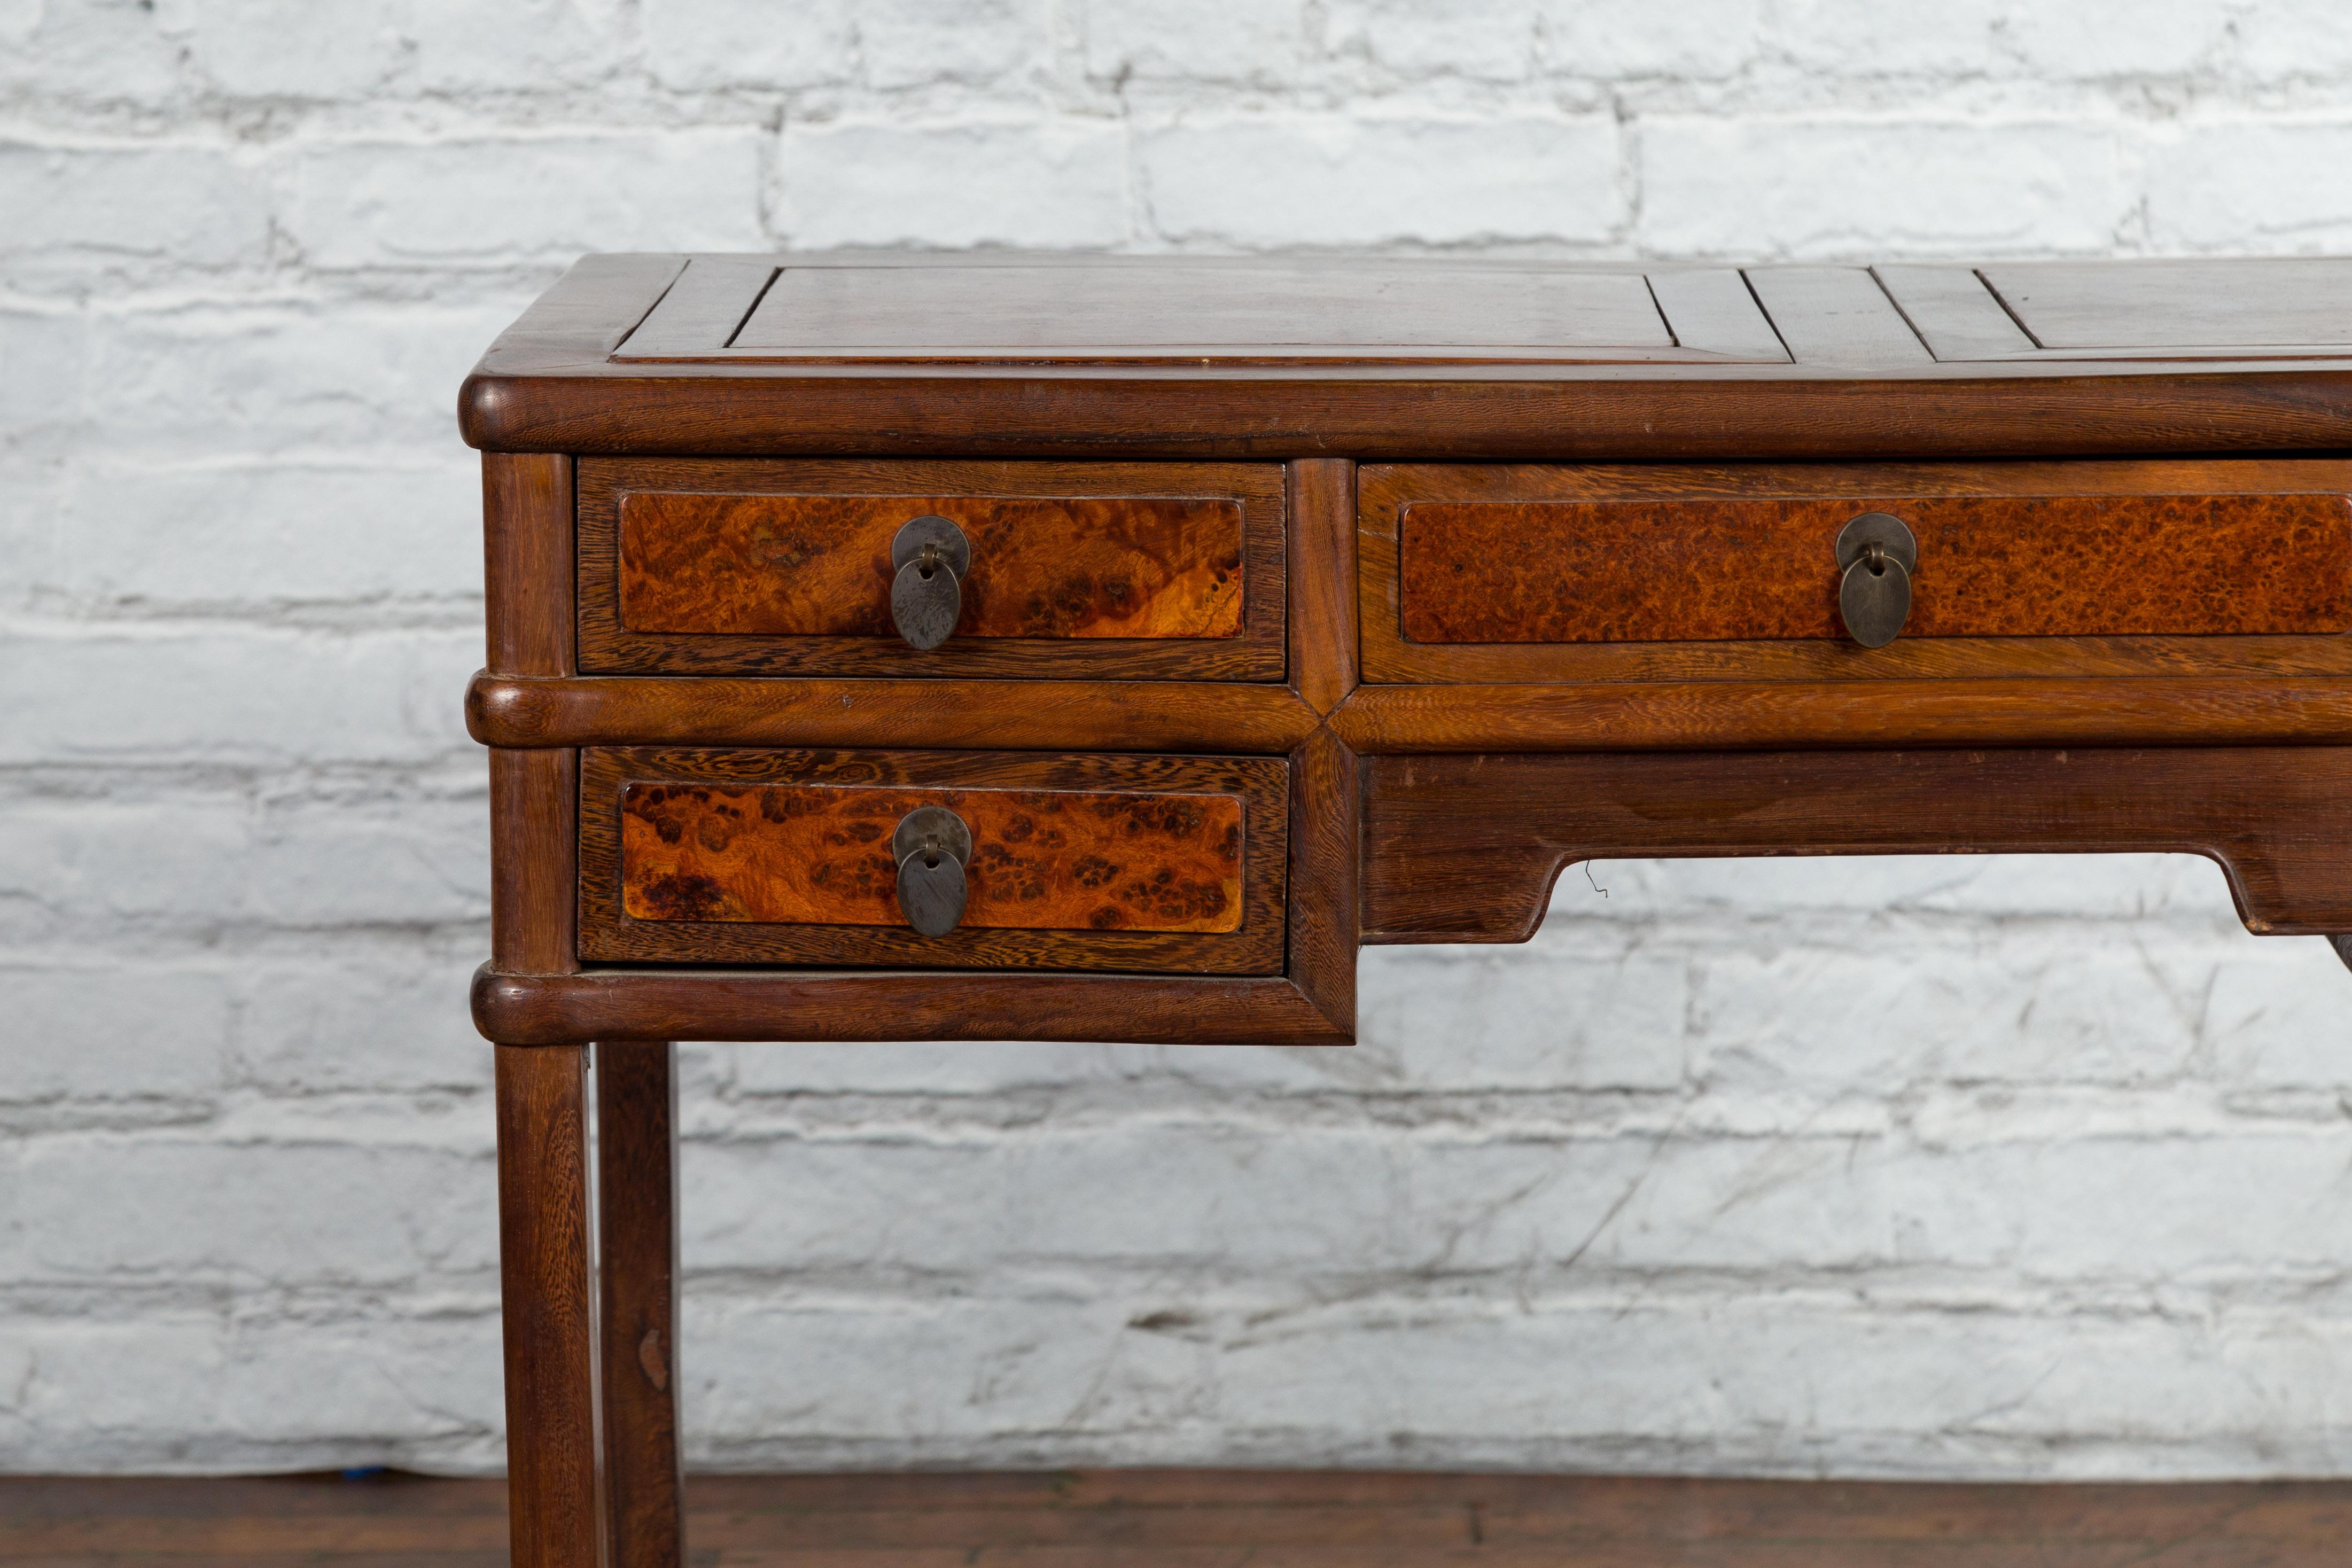 Qing Dynasty 19th Century Desk with Burlwood Top, Drawers and Cracked Ice Shelf In Good Condition For Sale In Yonkers, NY